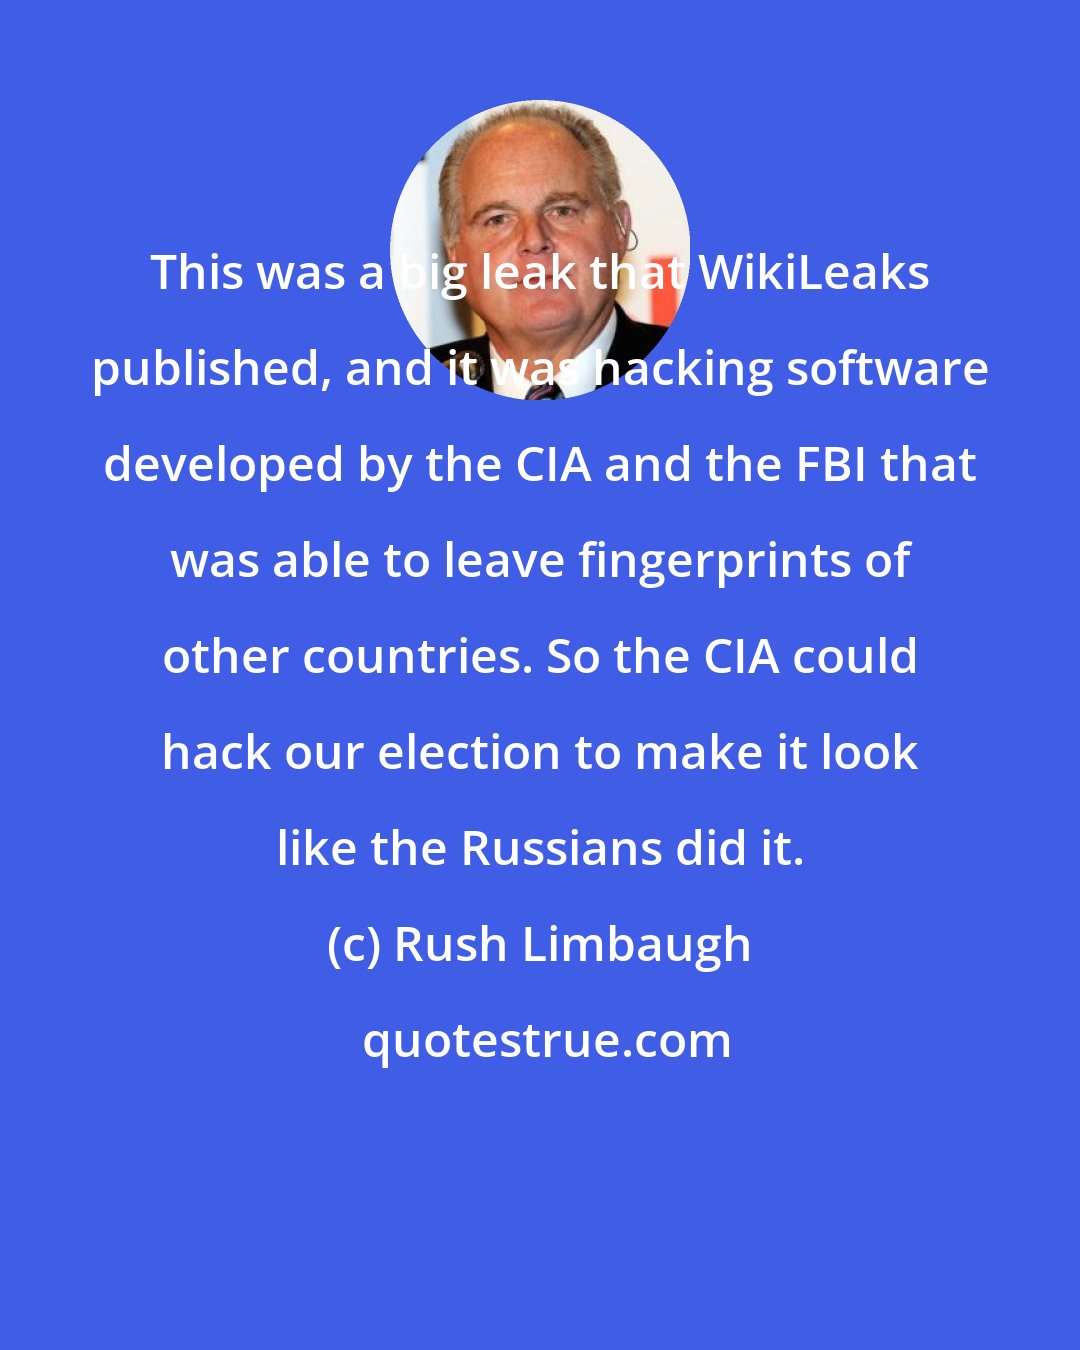 Rush Limbaugh: This was a big leak that WikiLeaks published, and it was hacking software developed by the CIA and the FBI that was able to leave fingerprints of other countries. So the CIA could hack our election to make it look like the Russians did it.